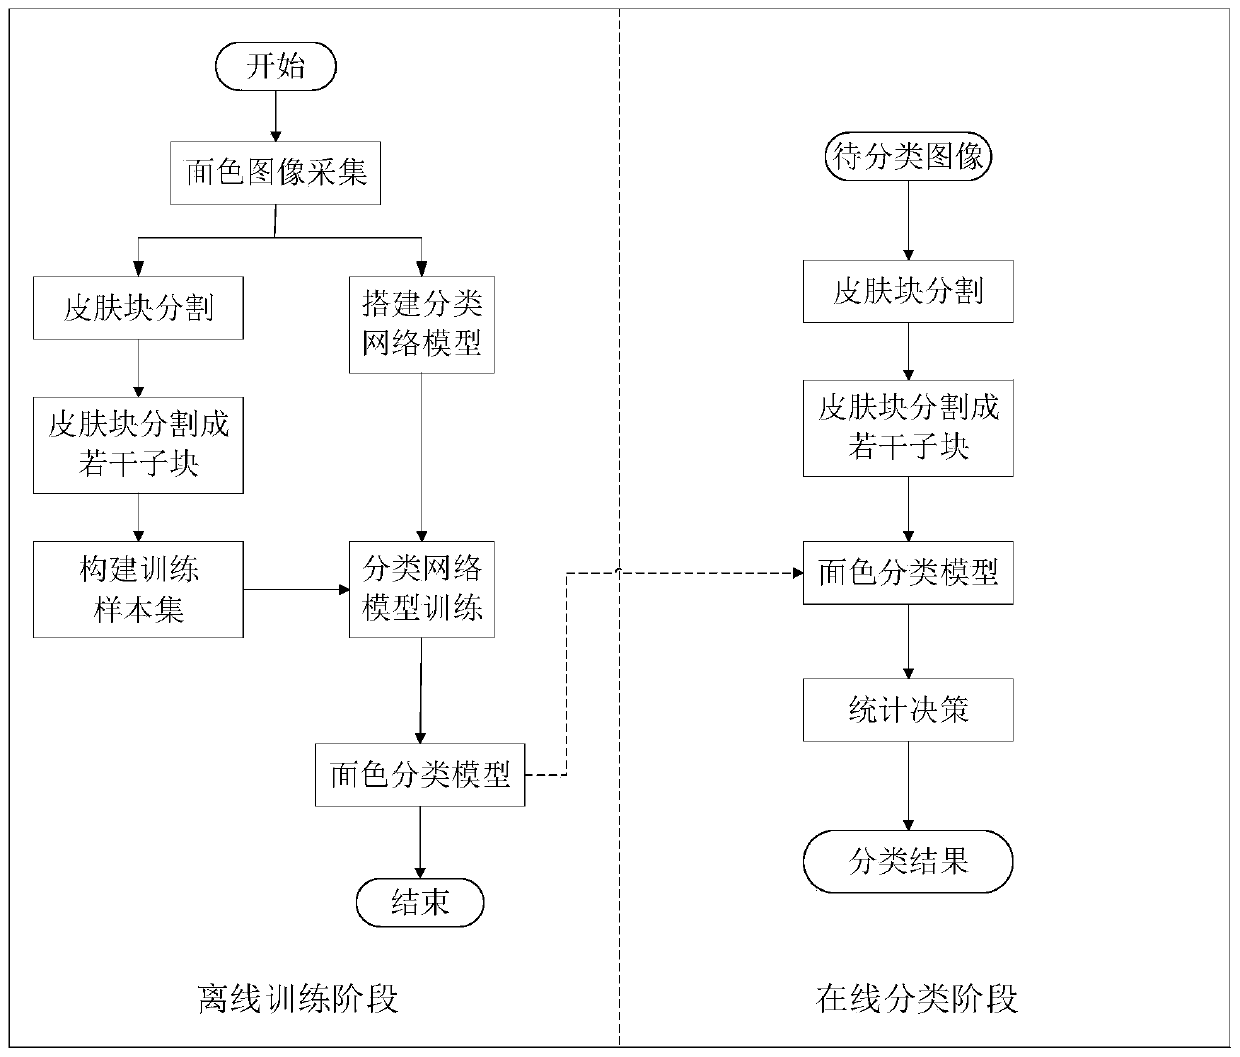 An automatic classification method of complexion in traditional Chinese medicine using shallow neural network